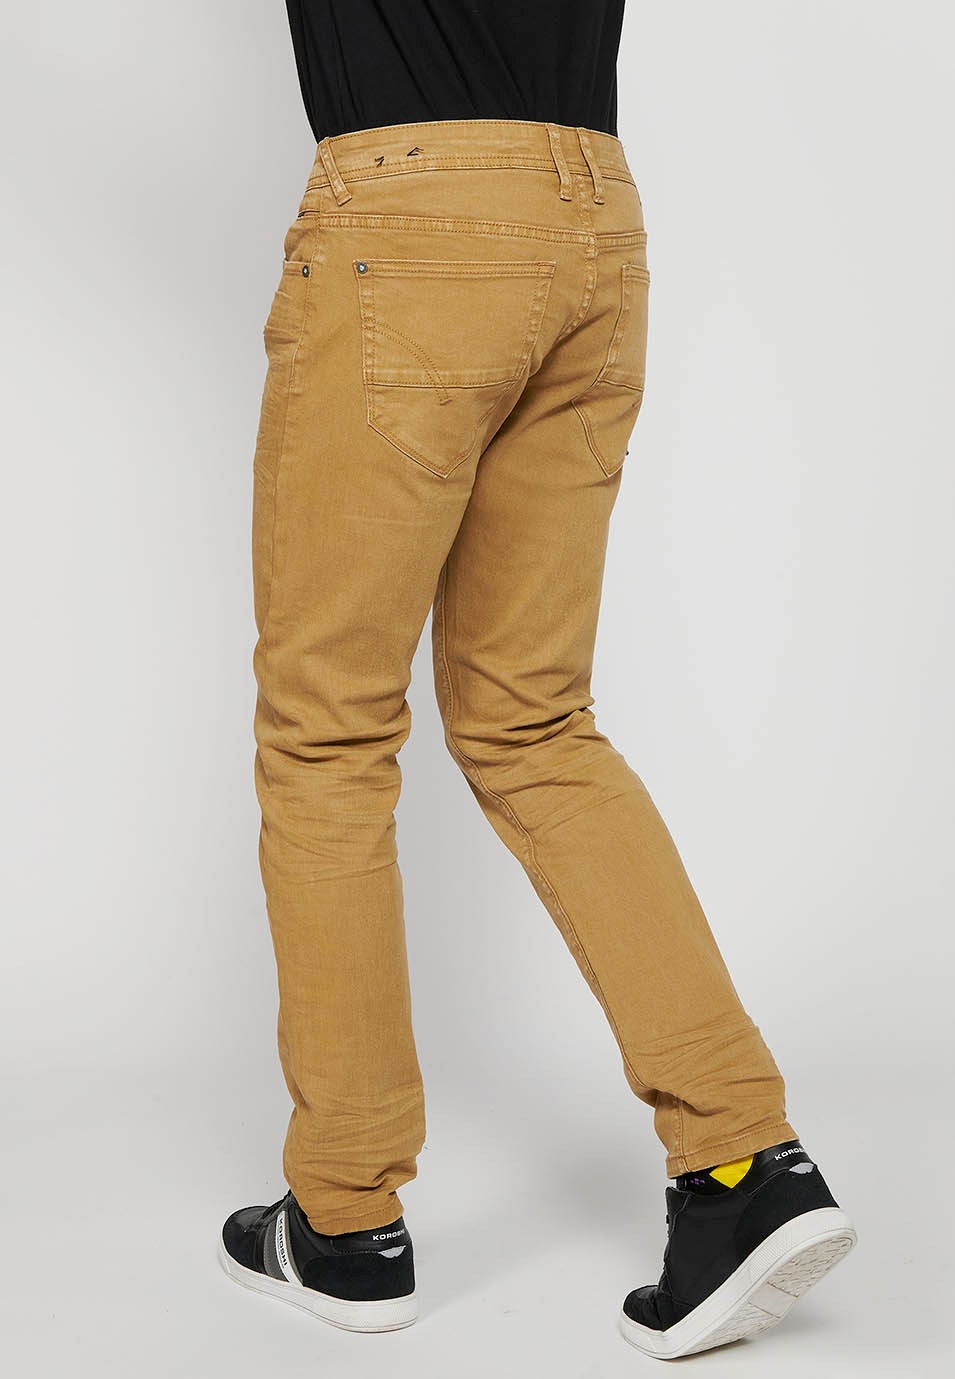 Long straight regular fit pants with front closure with zipper and button with five pockets, one pocket in Tan Color for Men